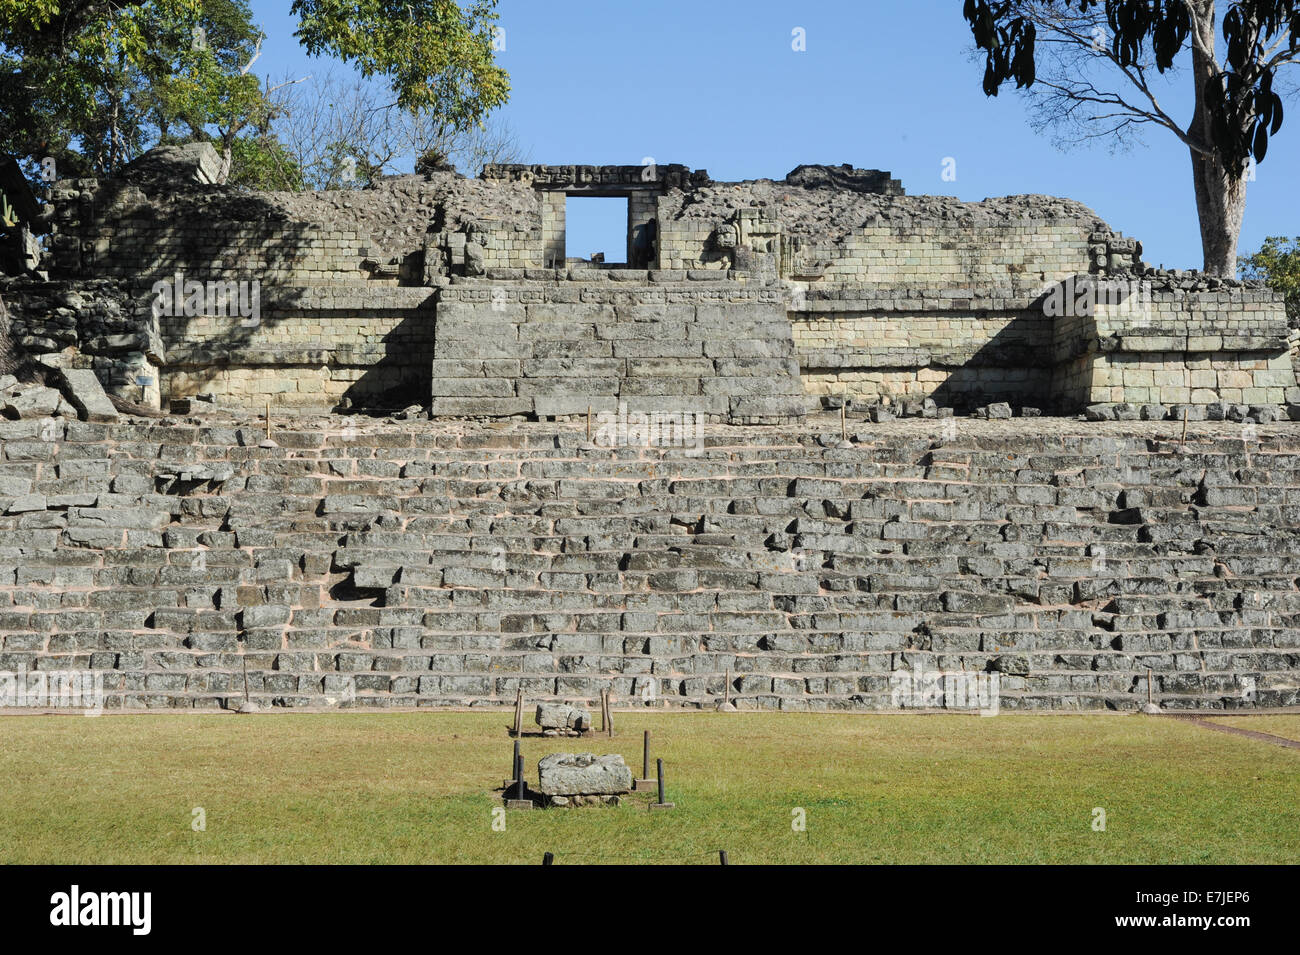 Central America, Americas, ancient, archaeology, architecture, building, built, carved, copan, culture, door, patio, exterior, g Stock Photo